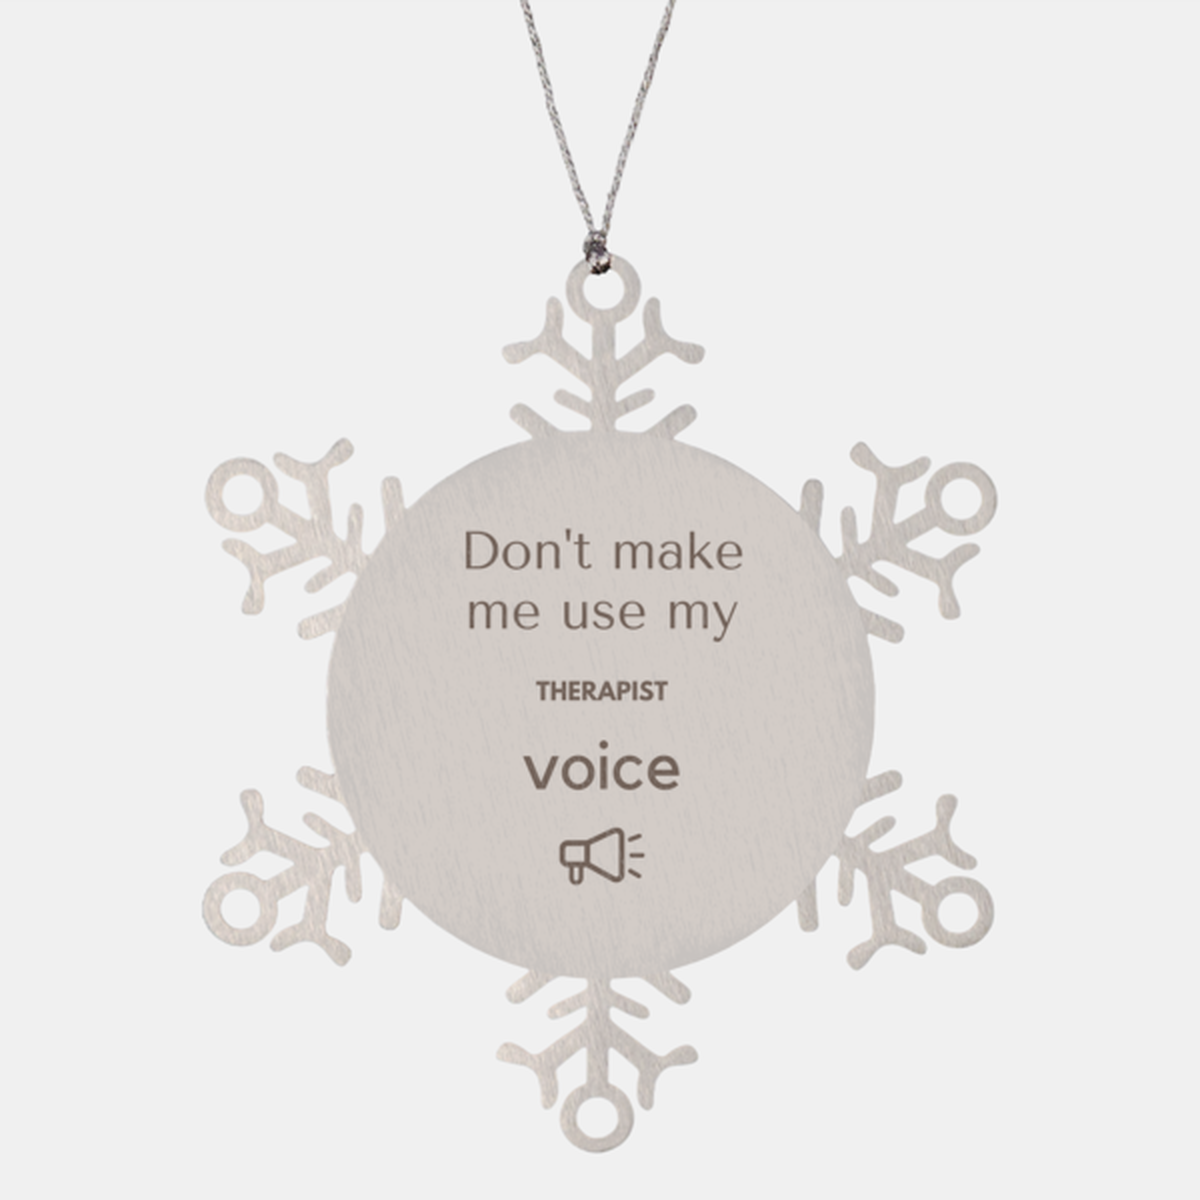 Don't make me use my Therapist voice, Sarcasm Therapist Ornament Gifts, Christmas Therapist Snowflake Ornament Unique Gifts For Therapist Coworkers, Men, Women, Colleague, Friends